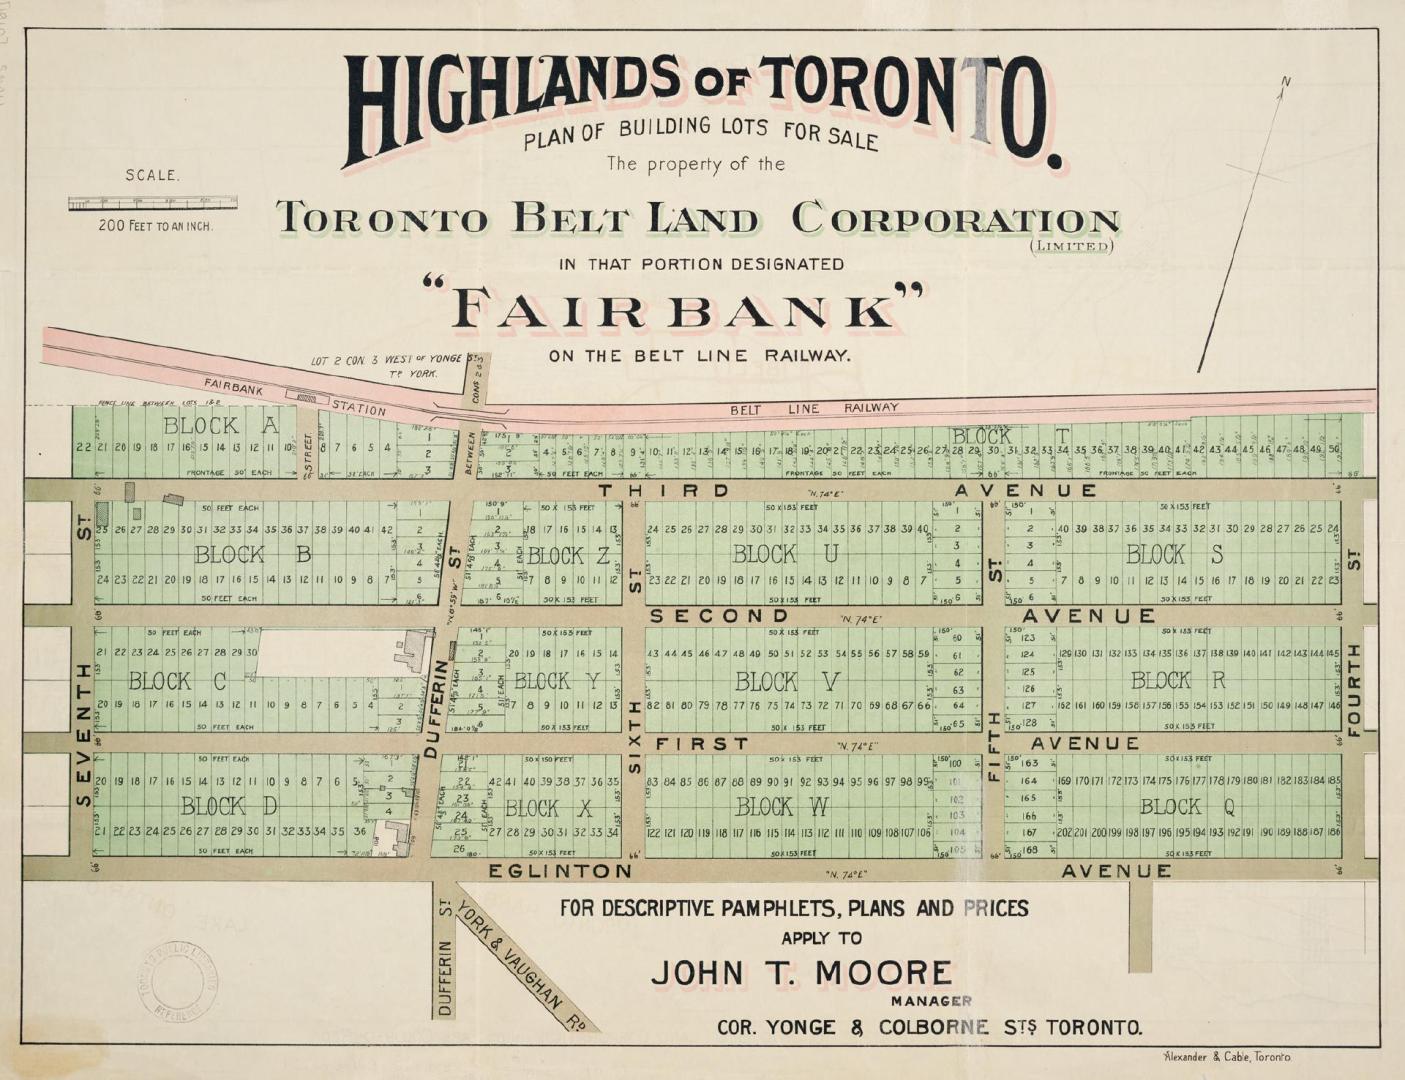 Highlands of Toronto plan of building lots for sale the property of the Toronto Belt Land Corporation in that portion designated ''Fairbank'' on the Belt Line Railway.